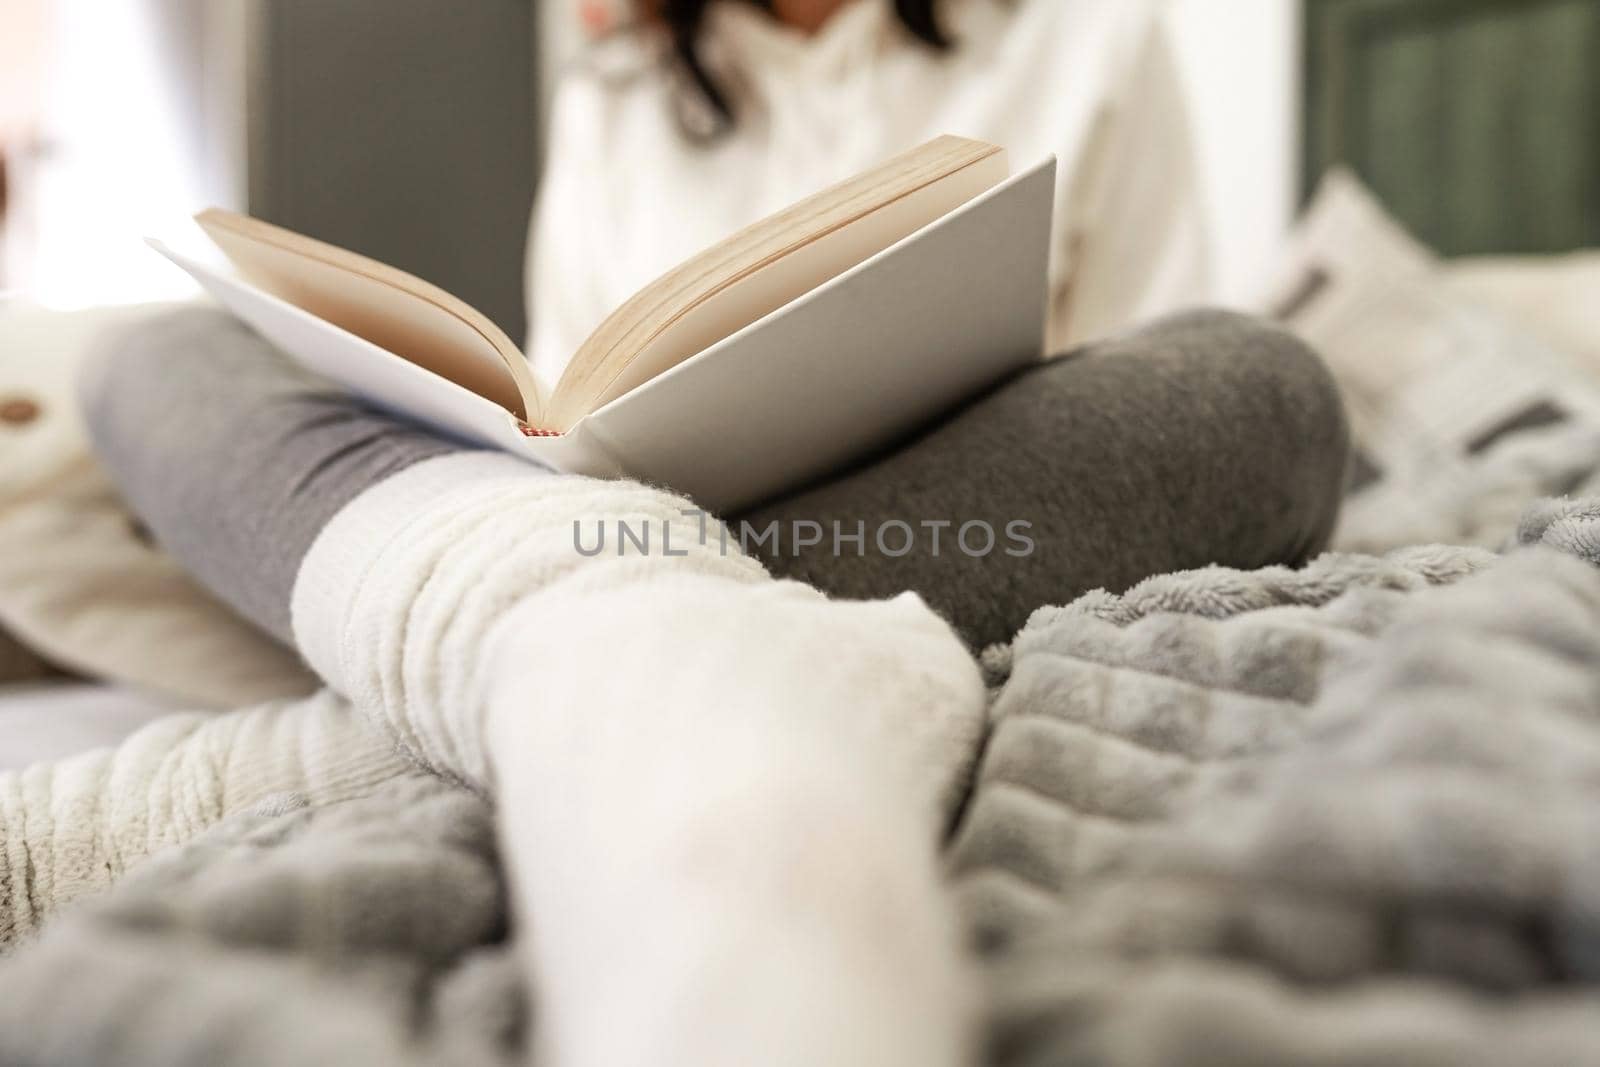 Low angle view of unrecognizable woman sitting on sofa in comfortable clothes relaxing reading a paper book with white wool socks blurred in foreground. Selective focus on the cover